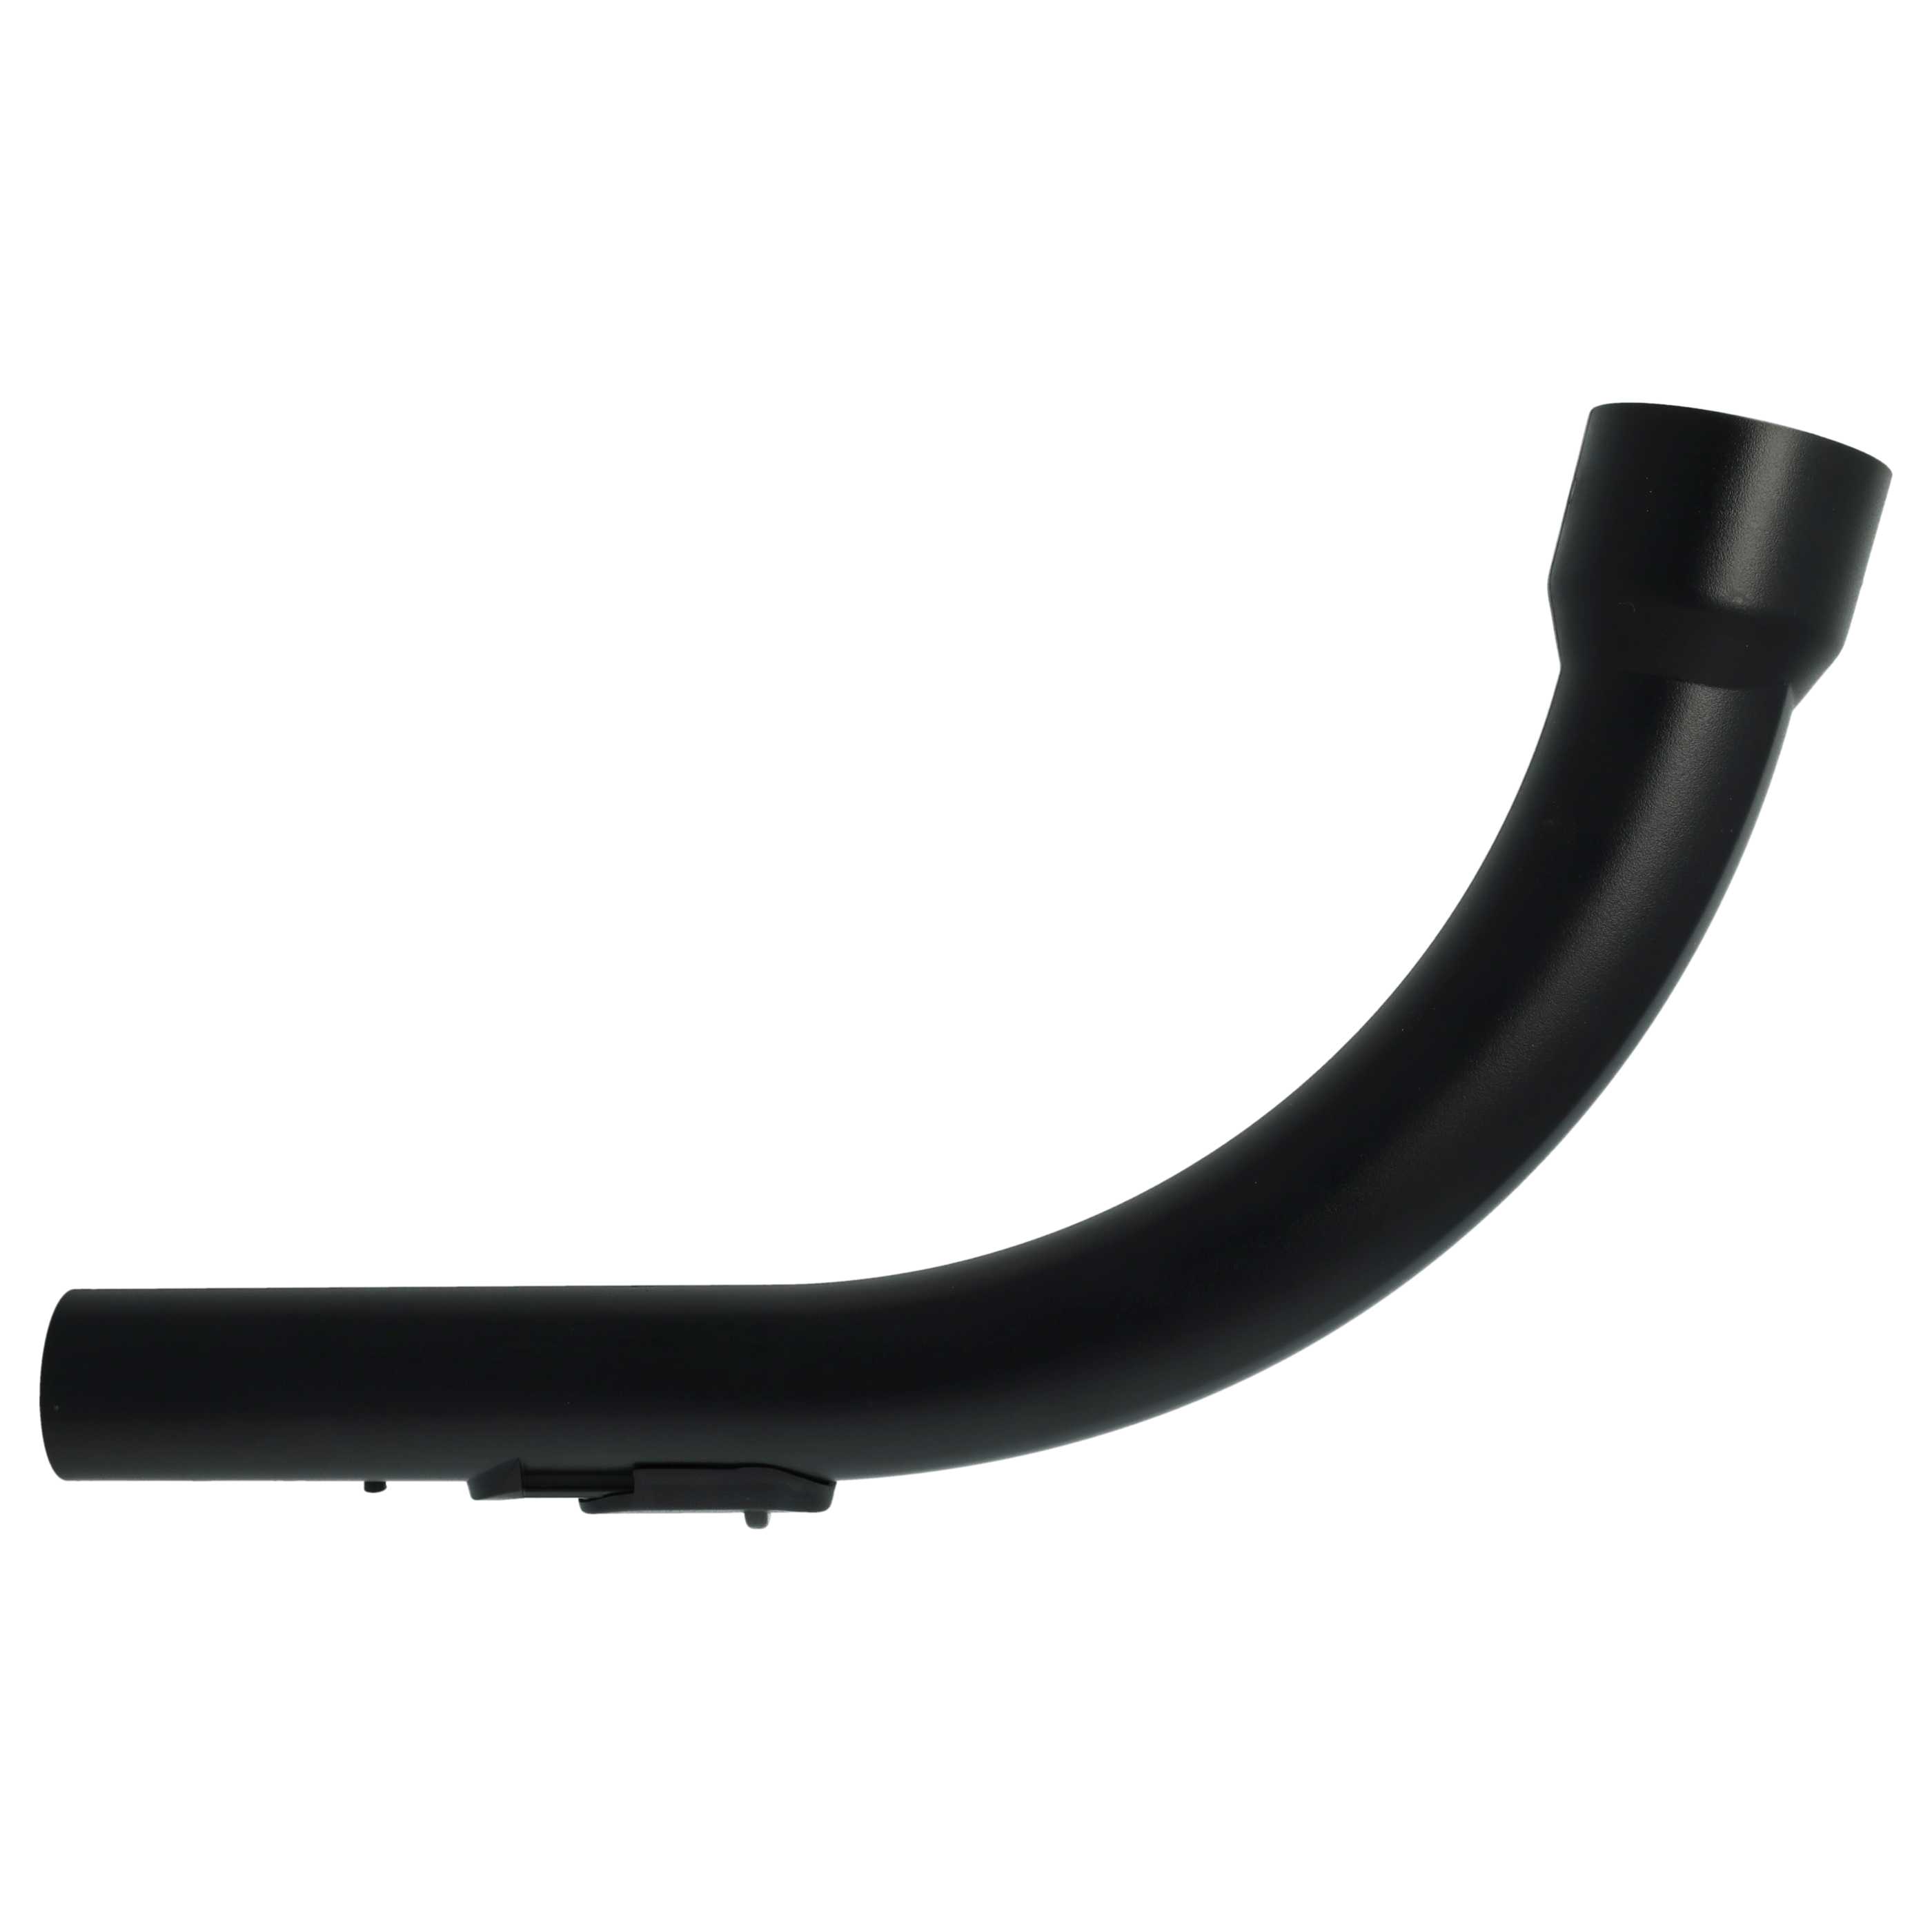 5x Vacuum Cleaner Handle as Replacement for Miele Vacuum Cleaner Handle 52690919442601 35 mm Diameter